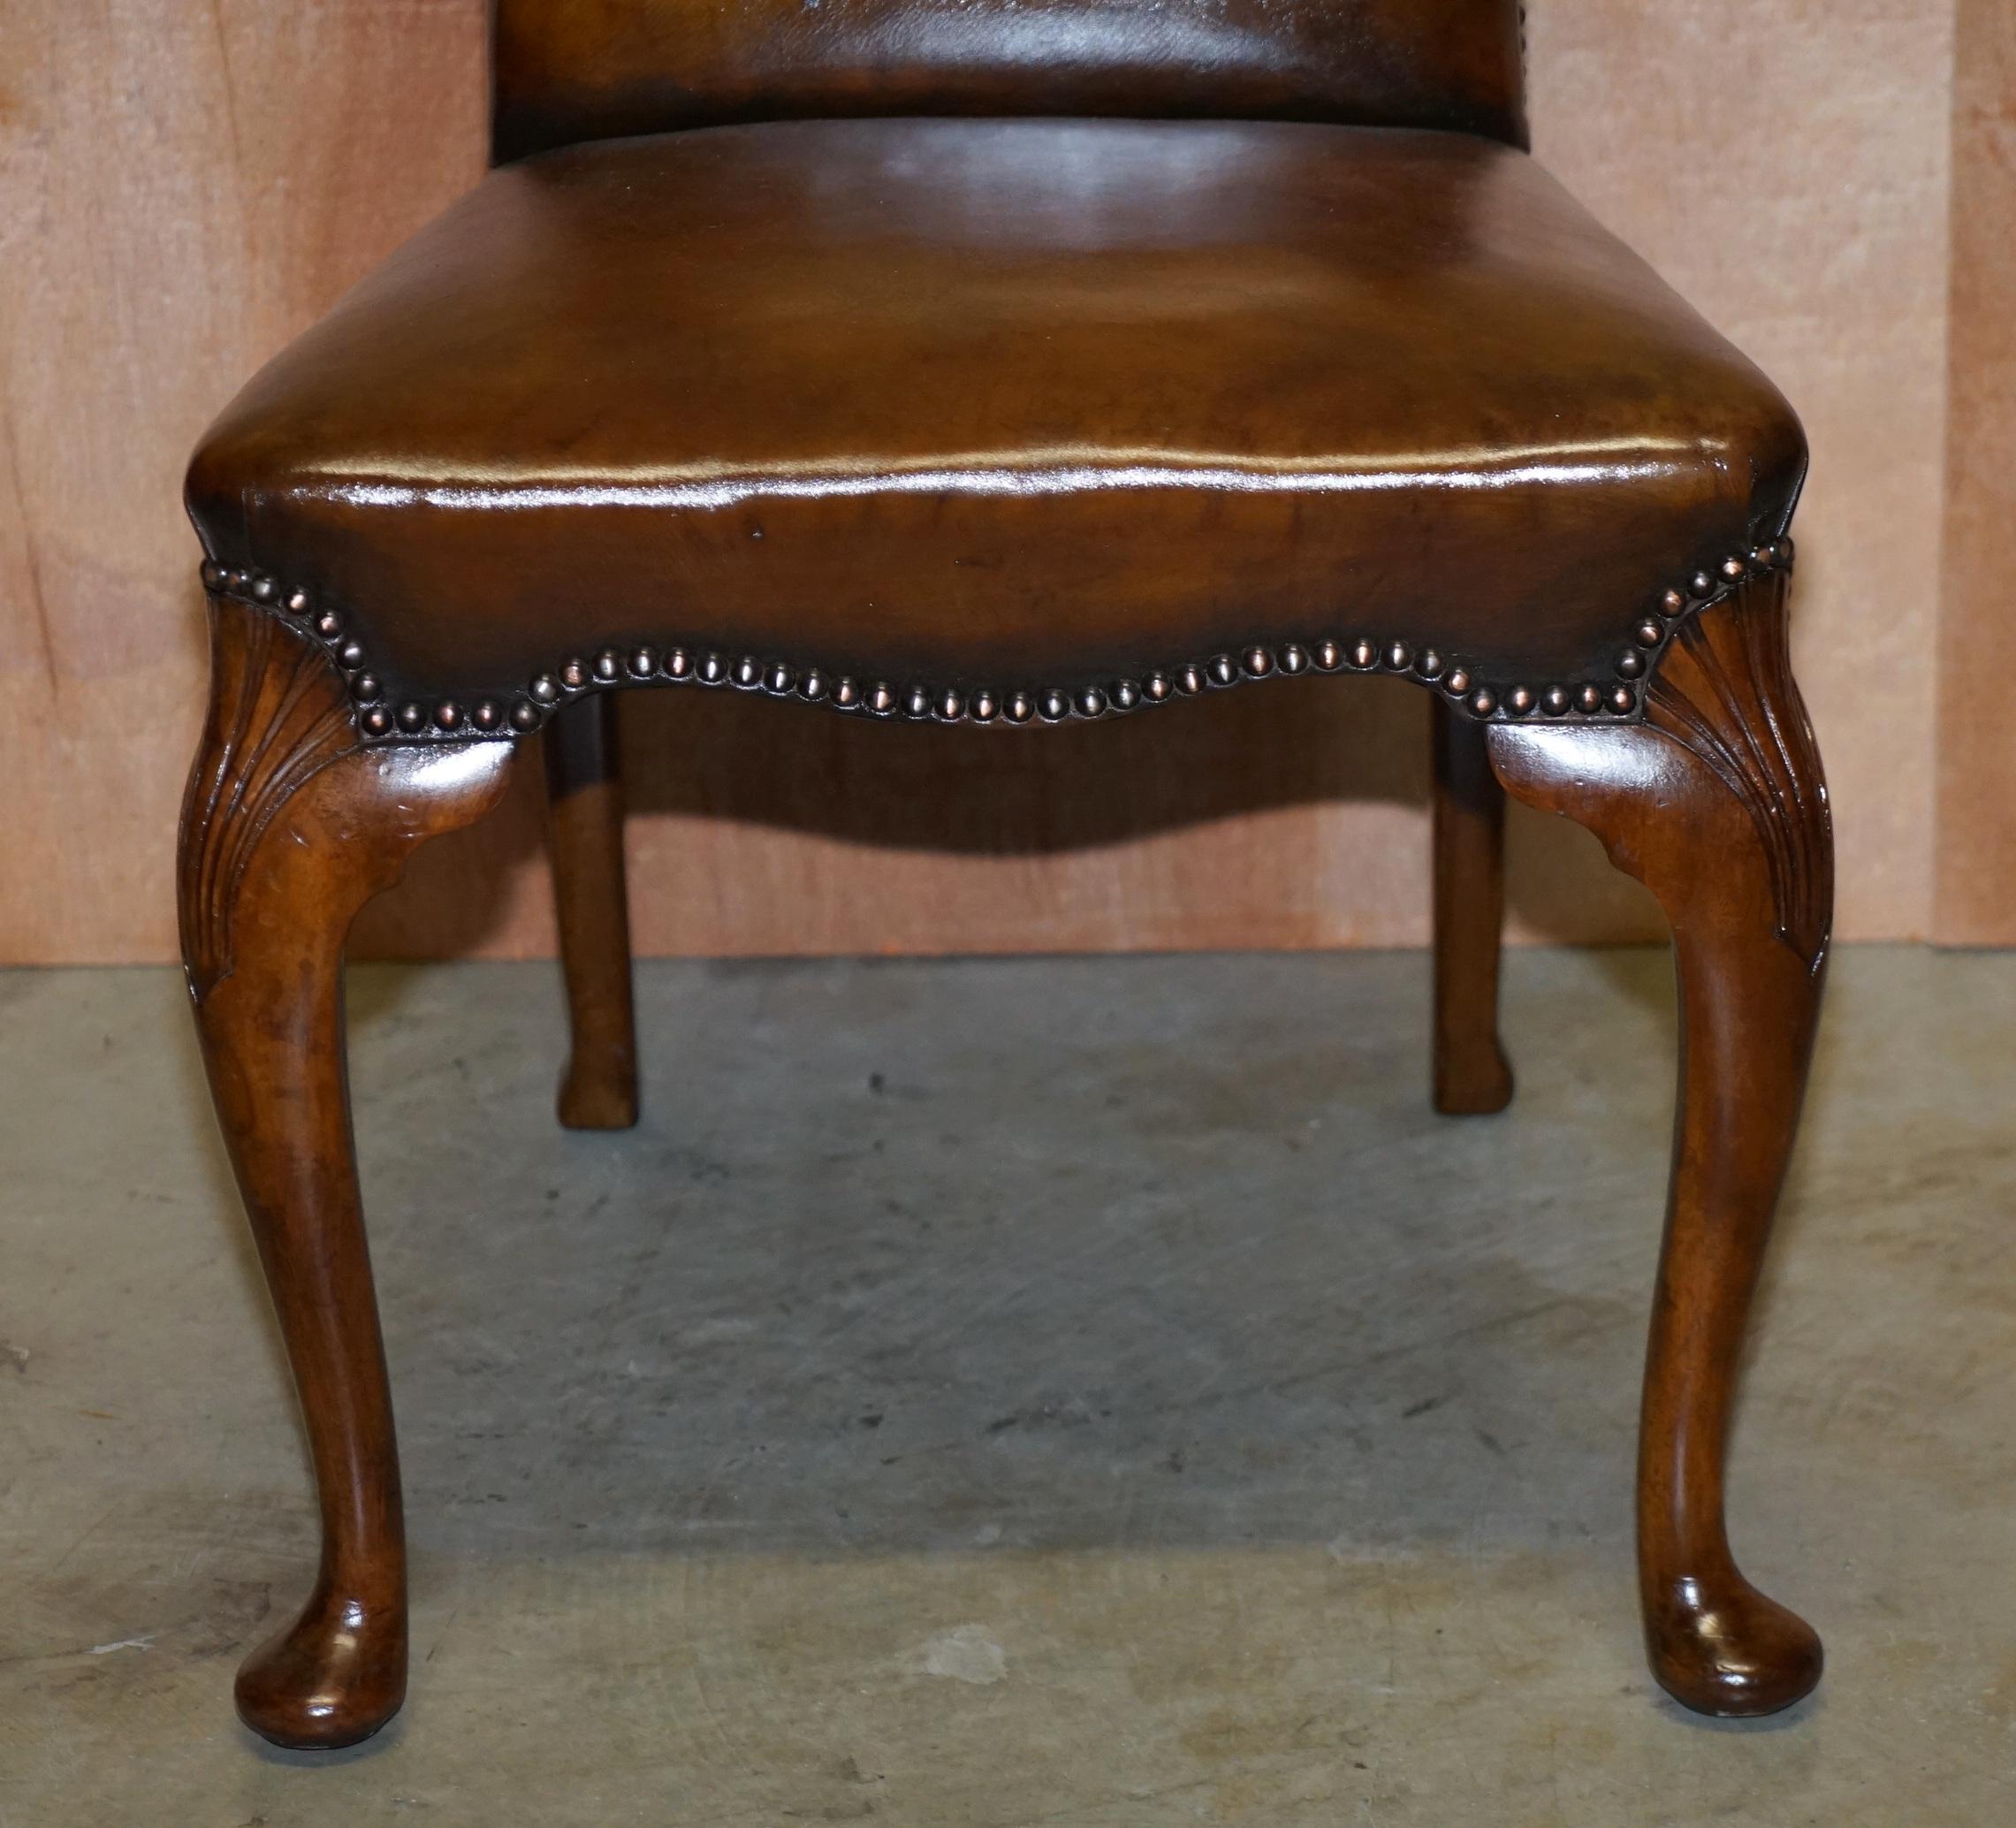 Hand-Crafted 10 Victorian 1880 Walnut Shepherds Crook Hand Dyed Brown Leather Dining Chairs